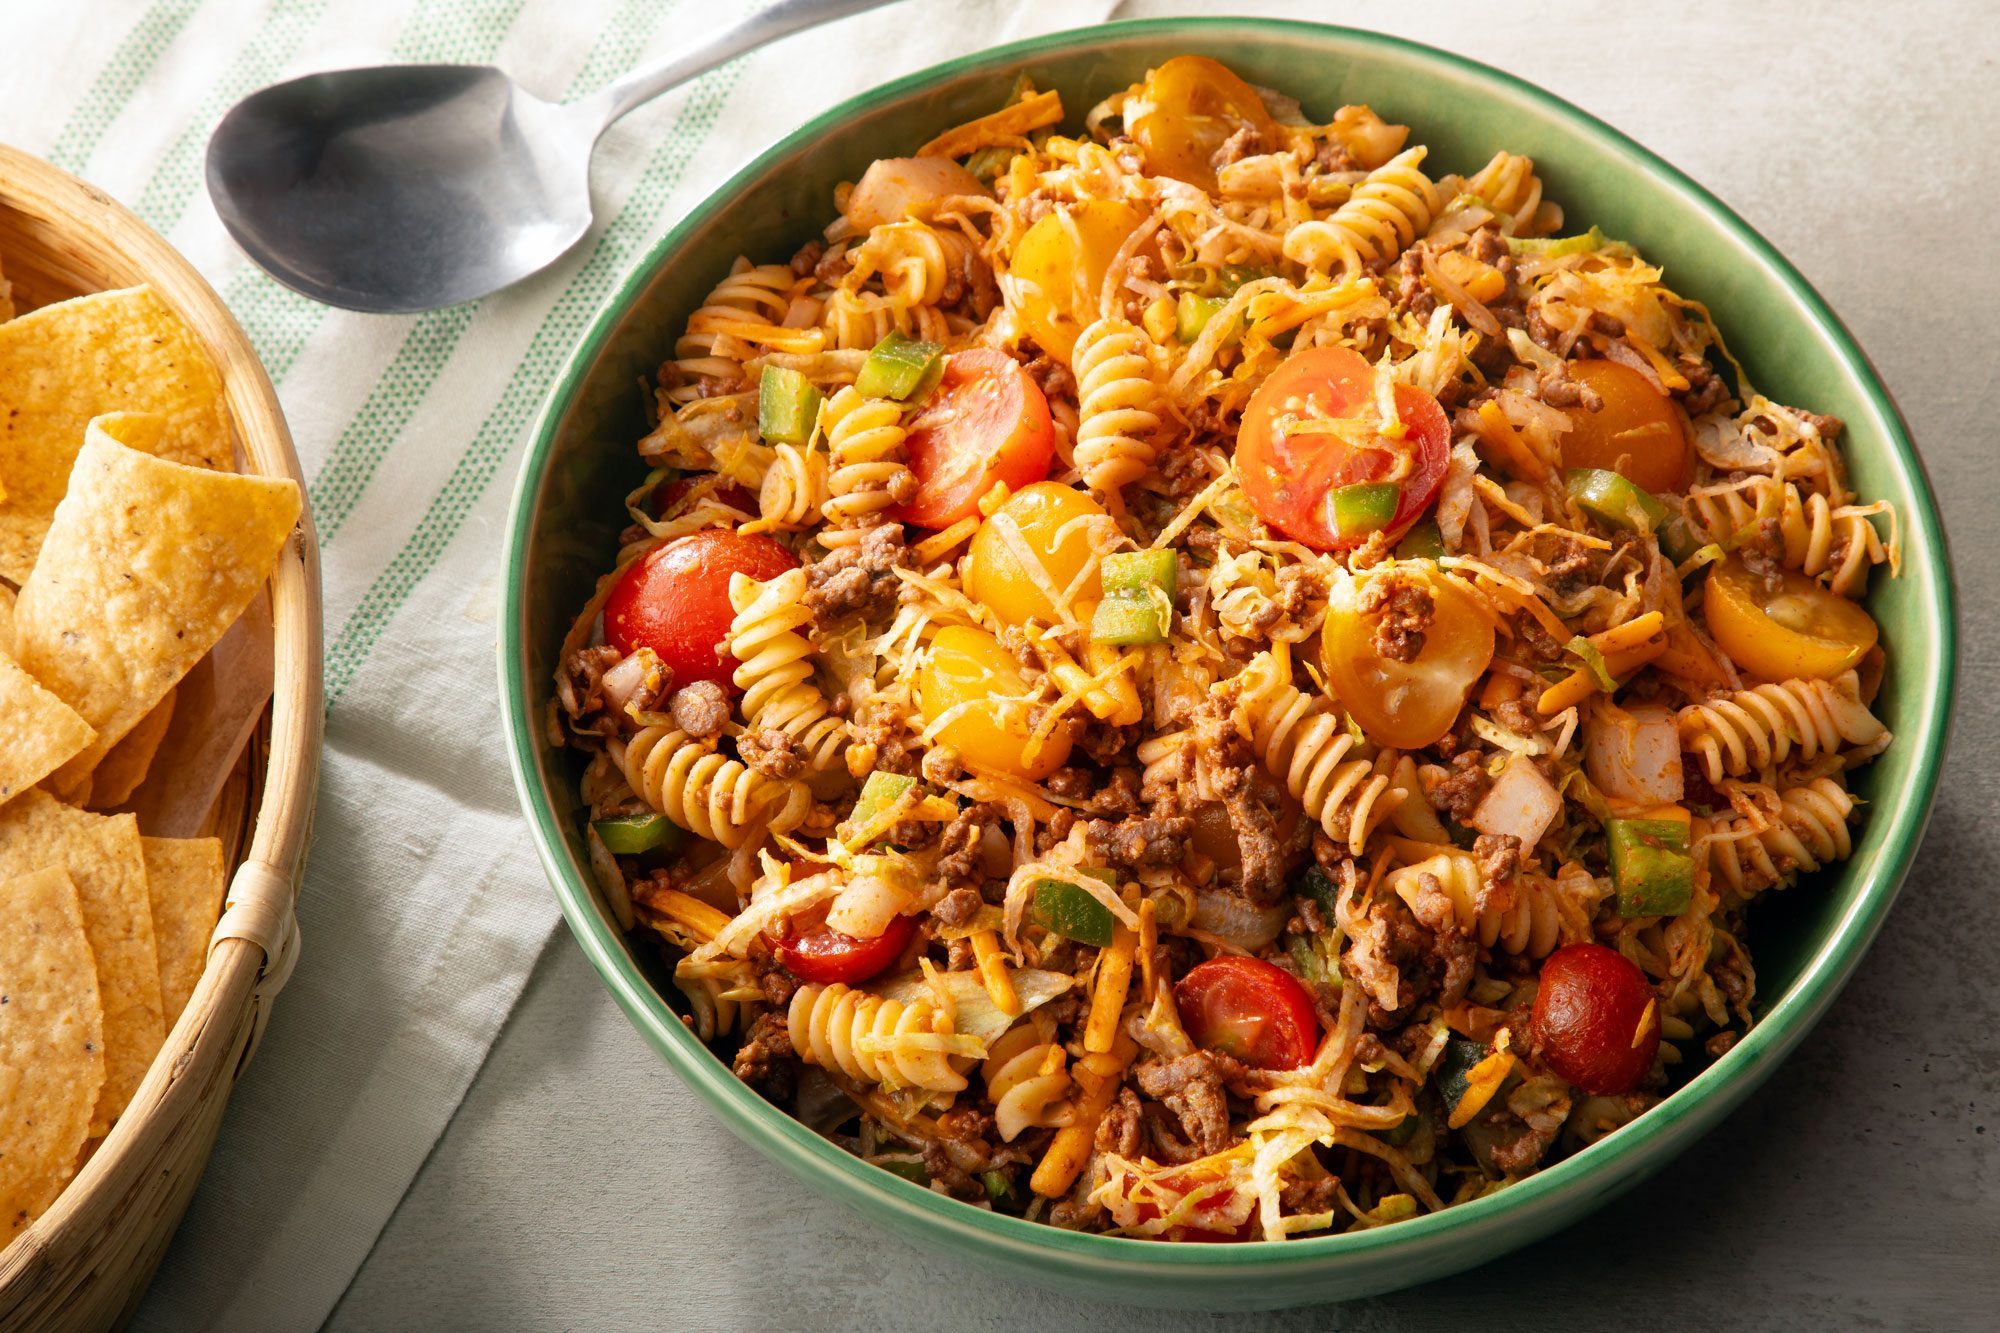 Taco Pasta Salad in green bowl on grey surface.